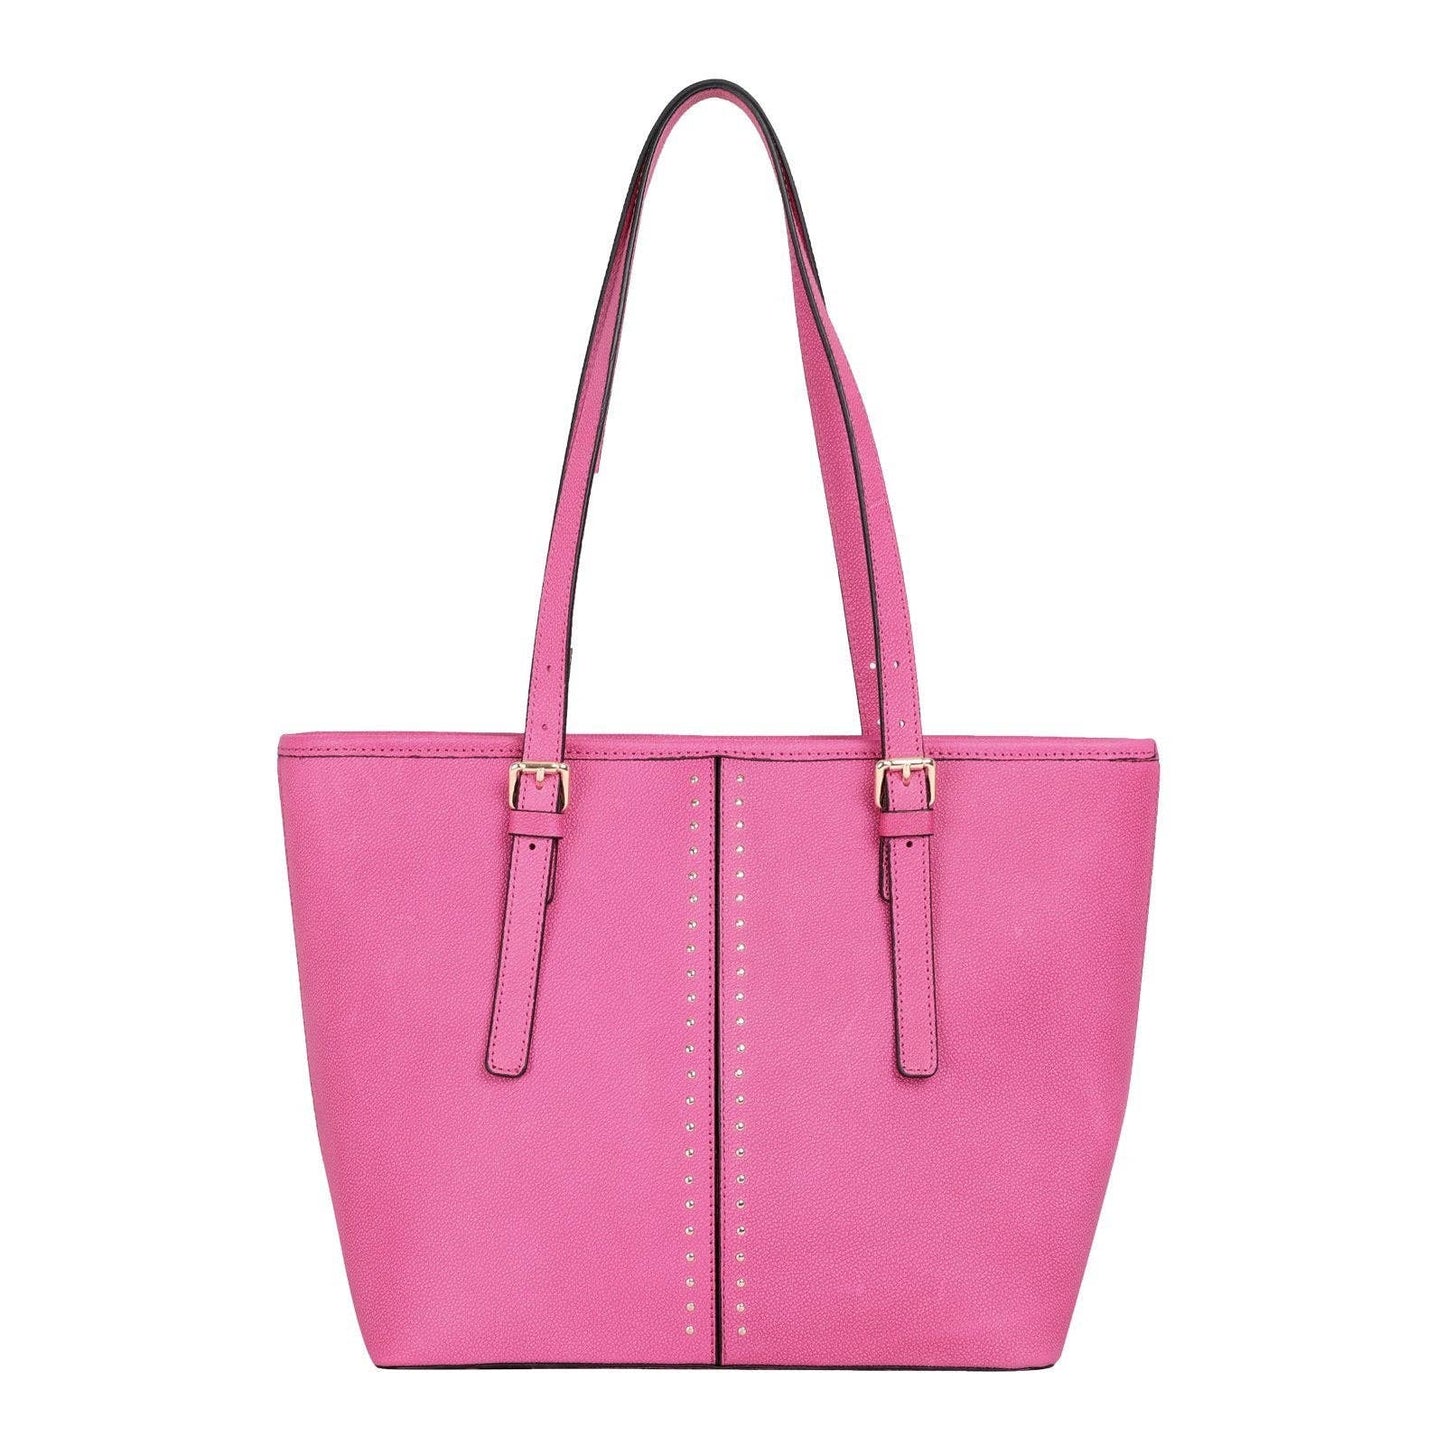 Montana West - MWRG-036 Montana West Real Leather Pink Tote: Hot Pink